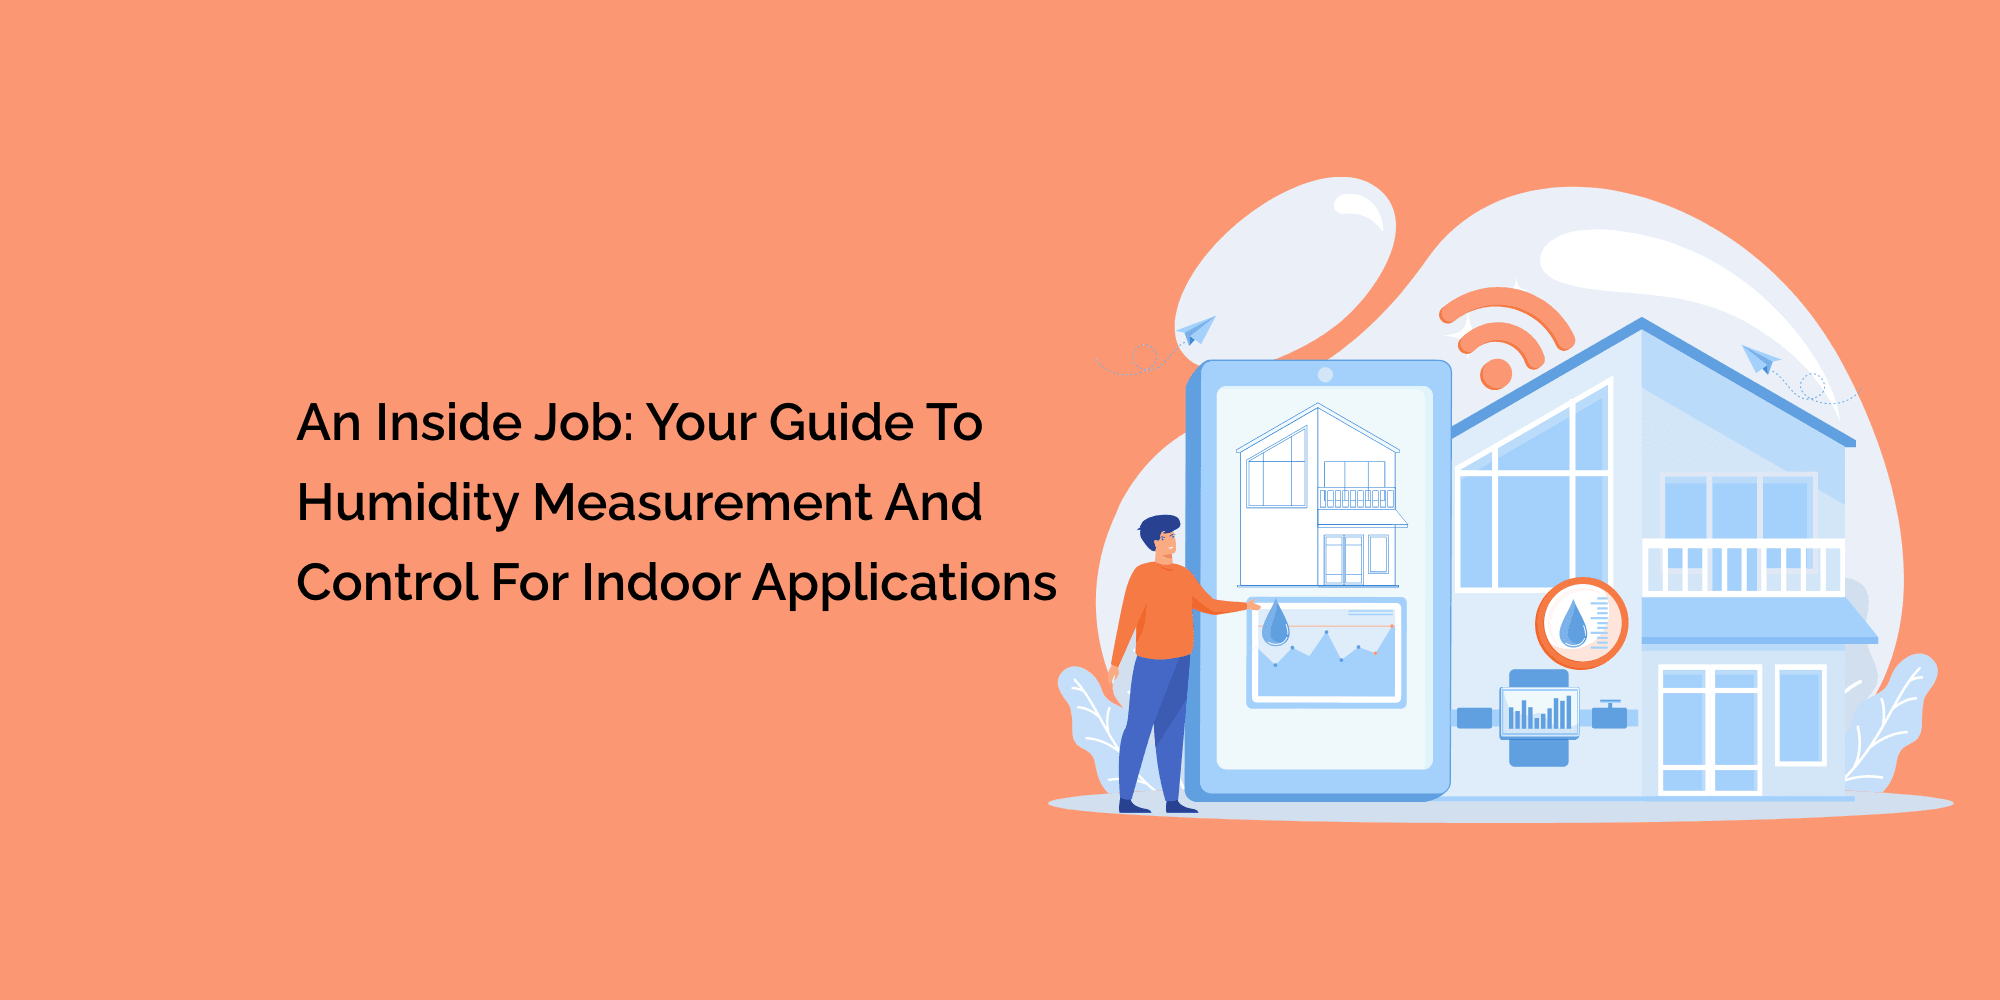 An Inside Job: Your Guide to Humidity Measurement and Control for Indoor Applications